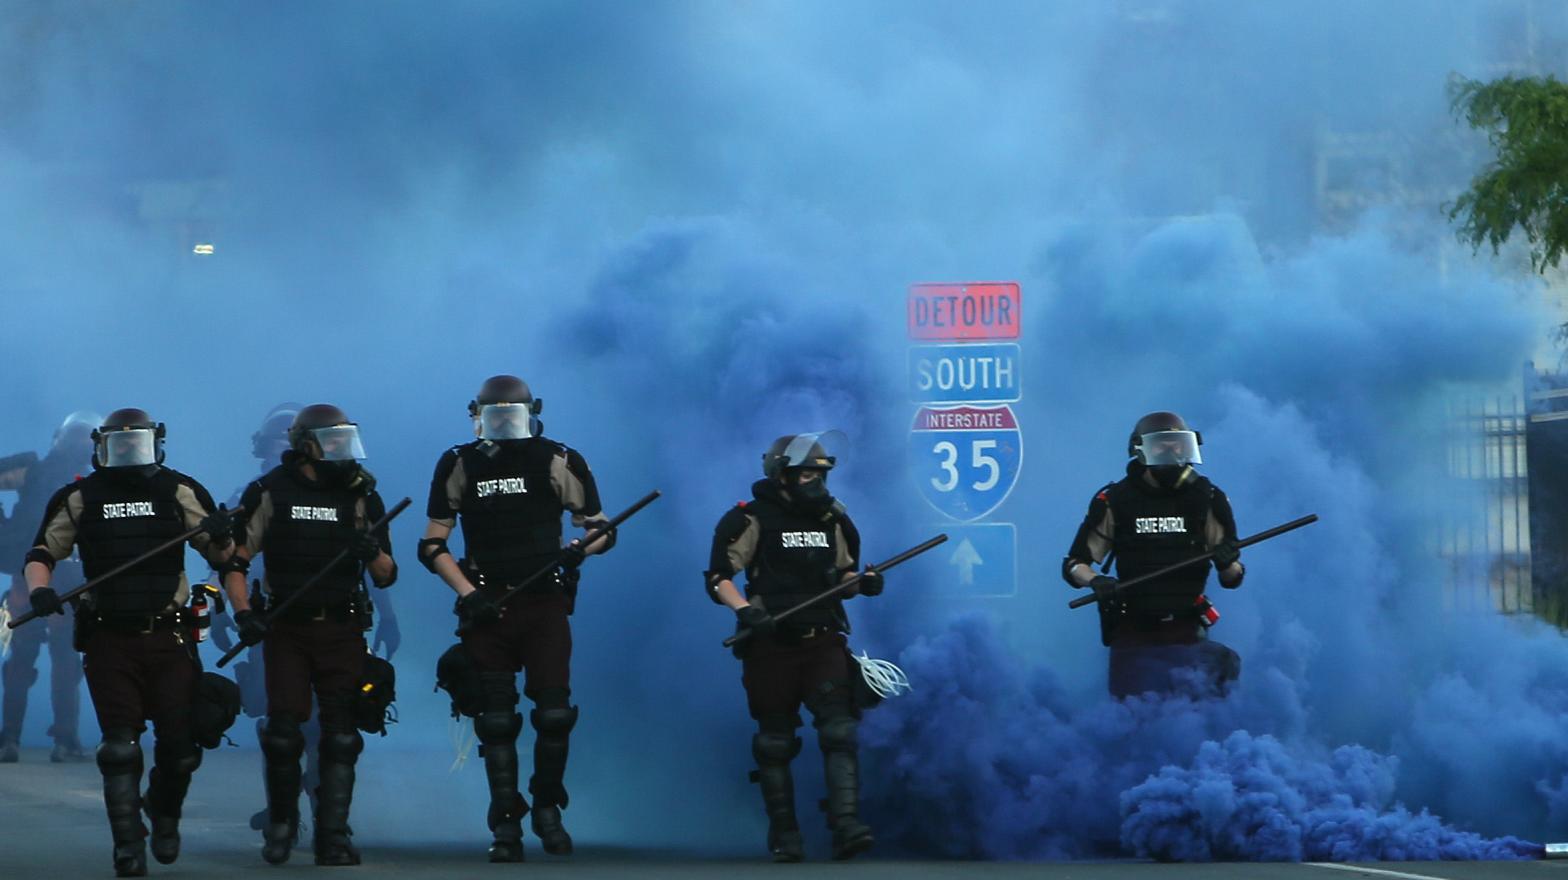 State police advance in a riot line on protesters in Minneapolis on May 30, 2020. (Photo: Scott Olson, Getty Images)